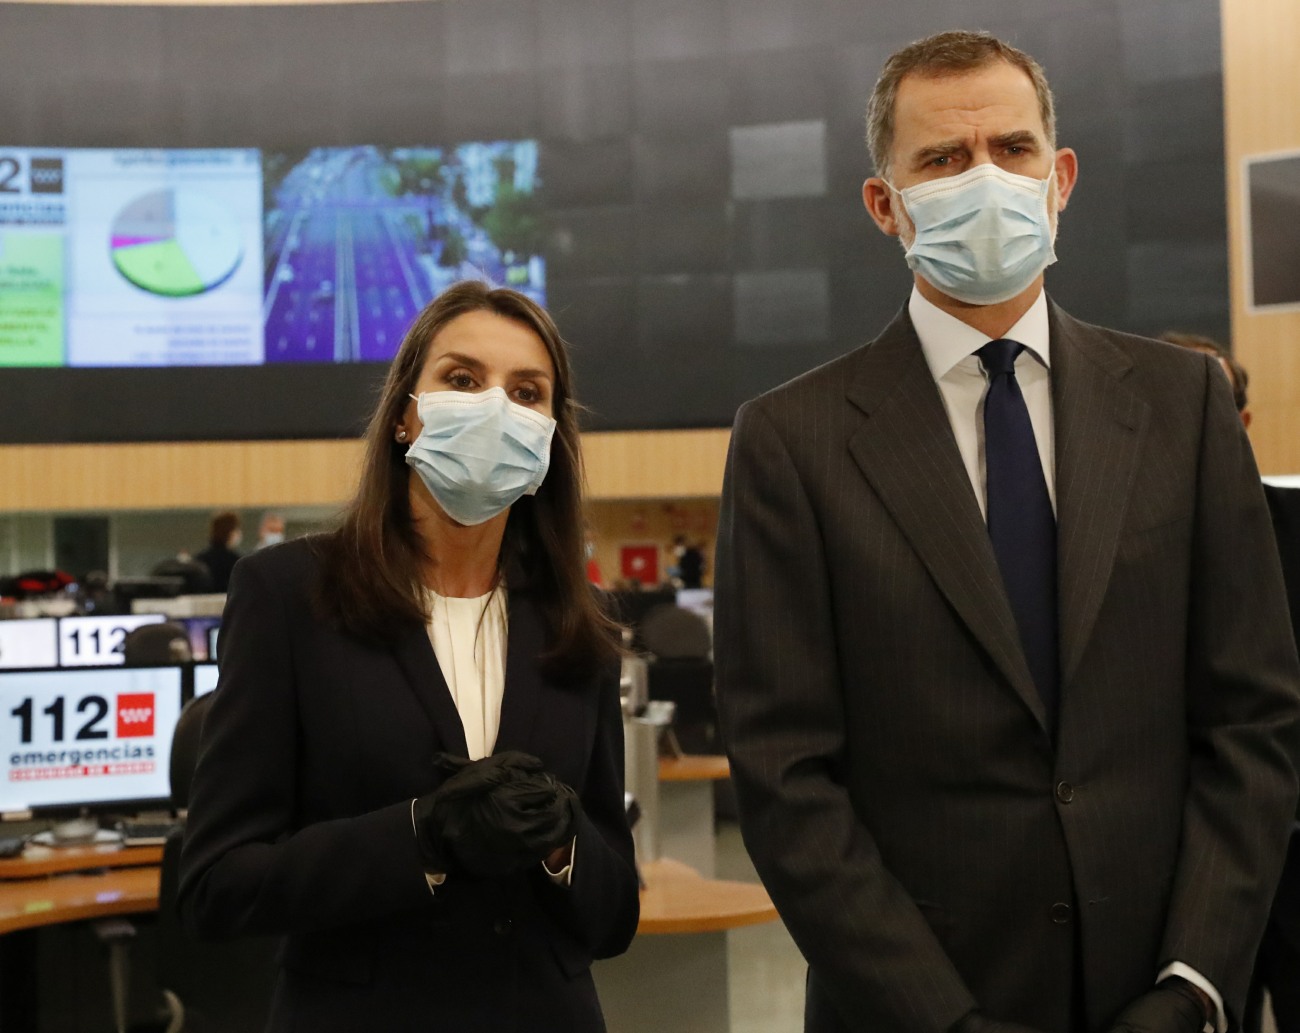 King Felipe VI of Spain and Queen Letizia of Spain return to public duties and wearing PPE as they visit facilities in Madrid, Spain